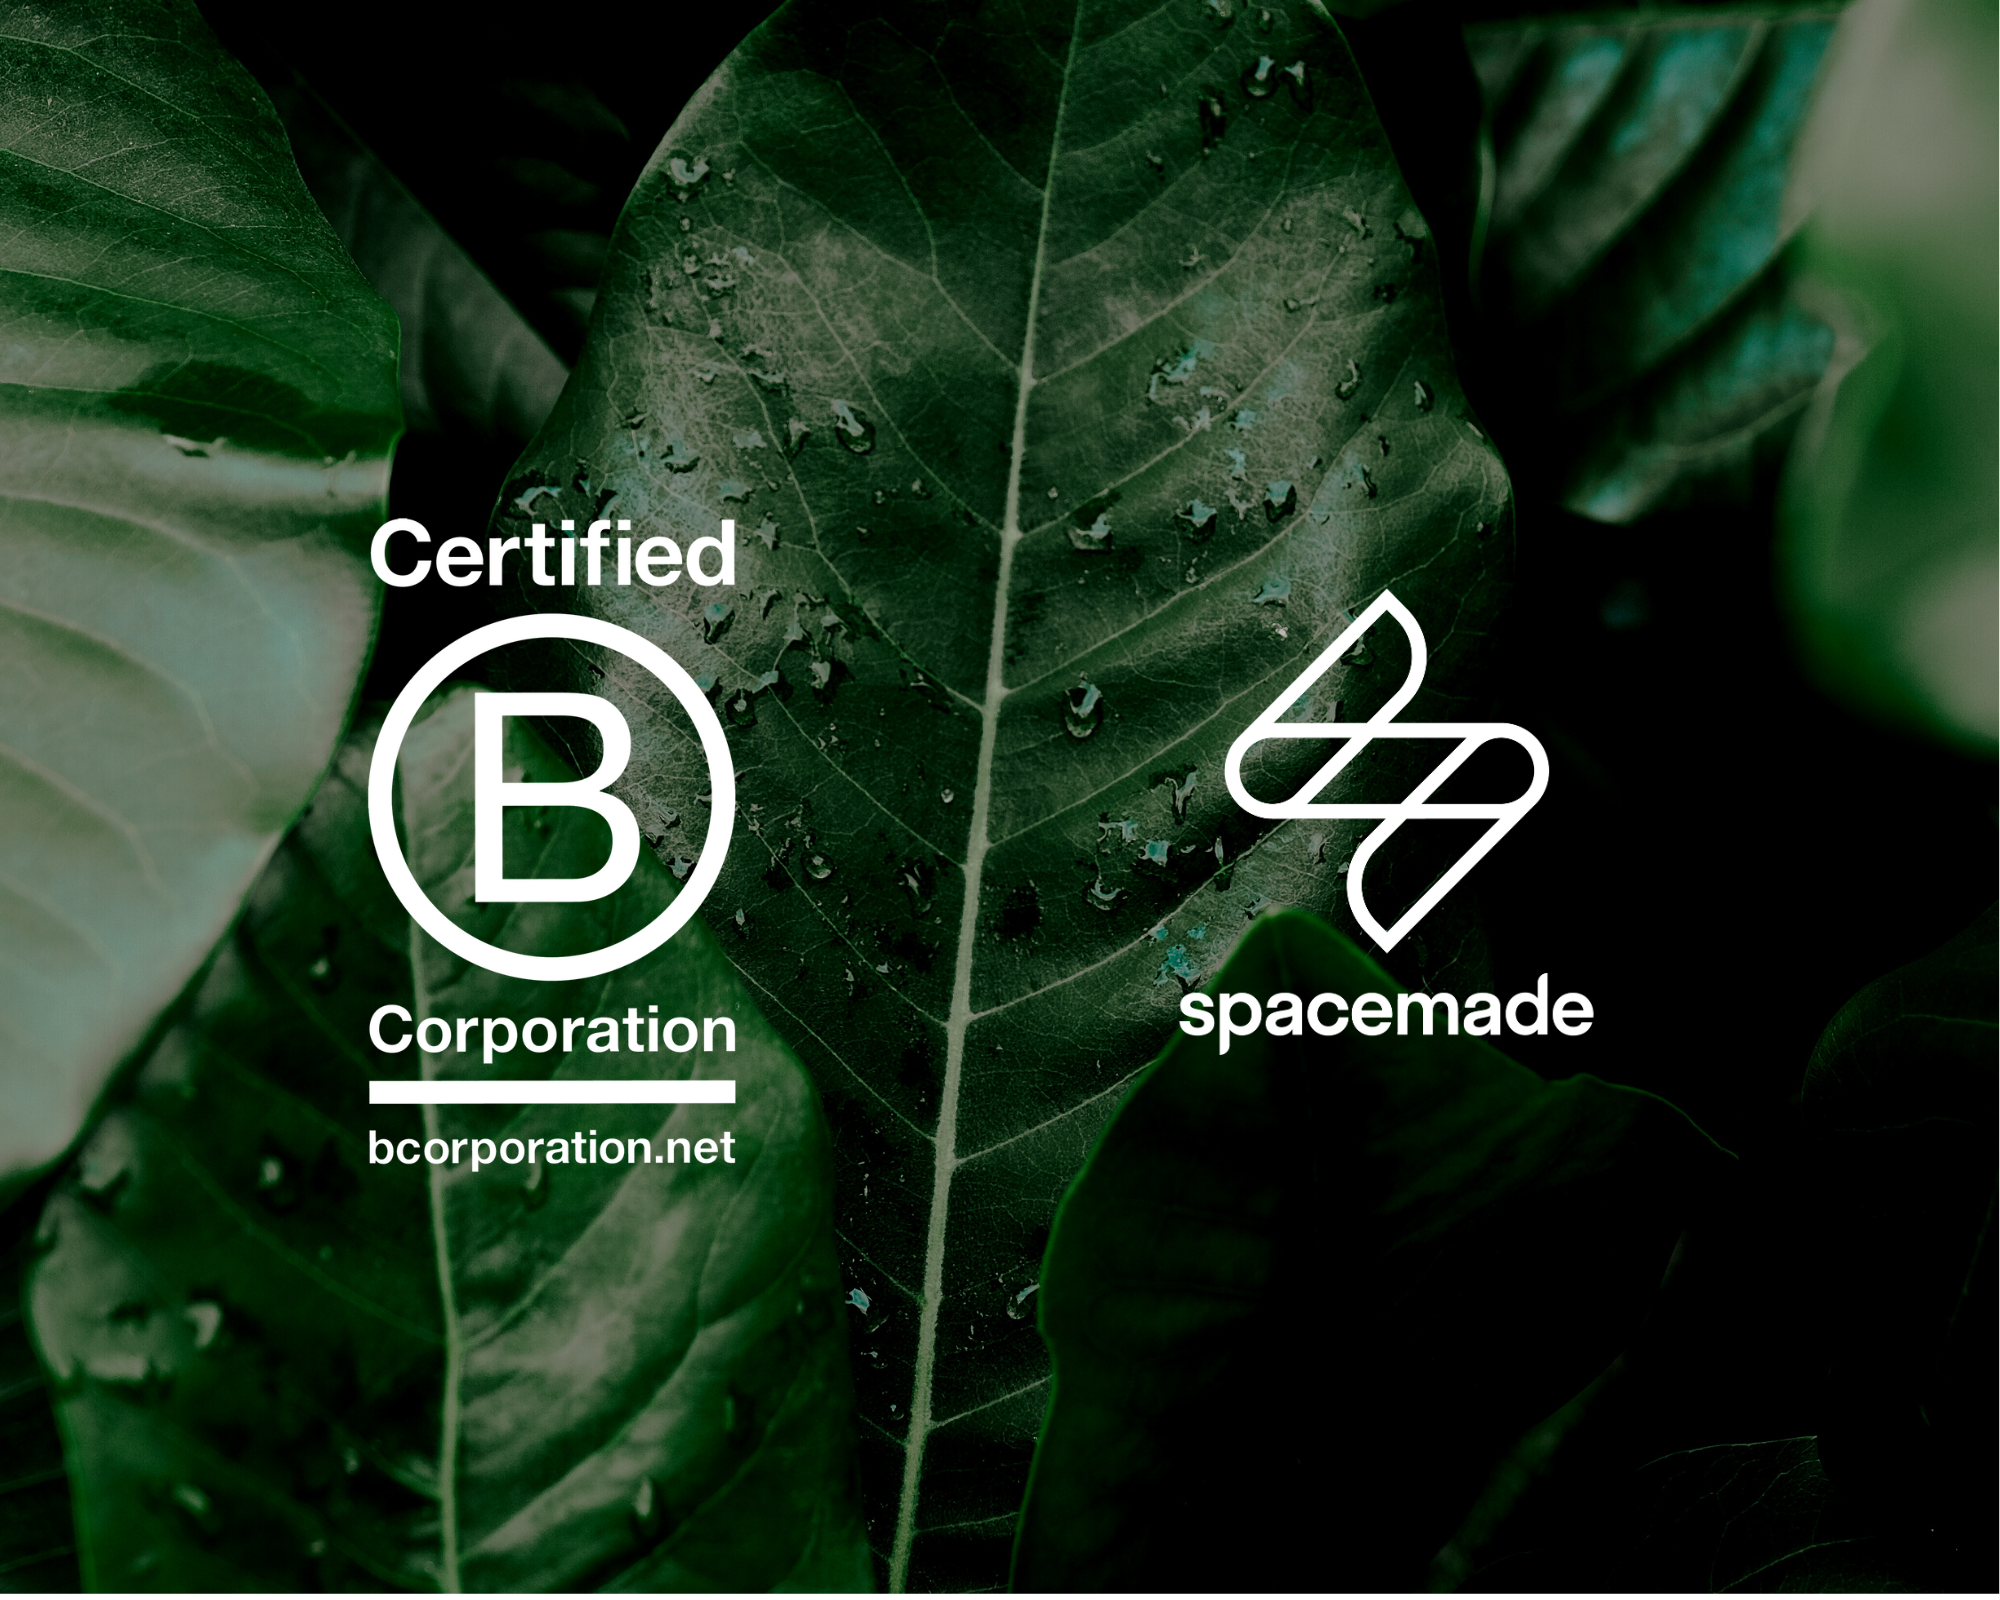 The B Corp Movement: Spacemade’s Commitment to a Better Future